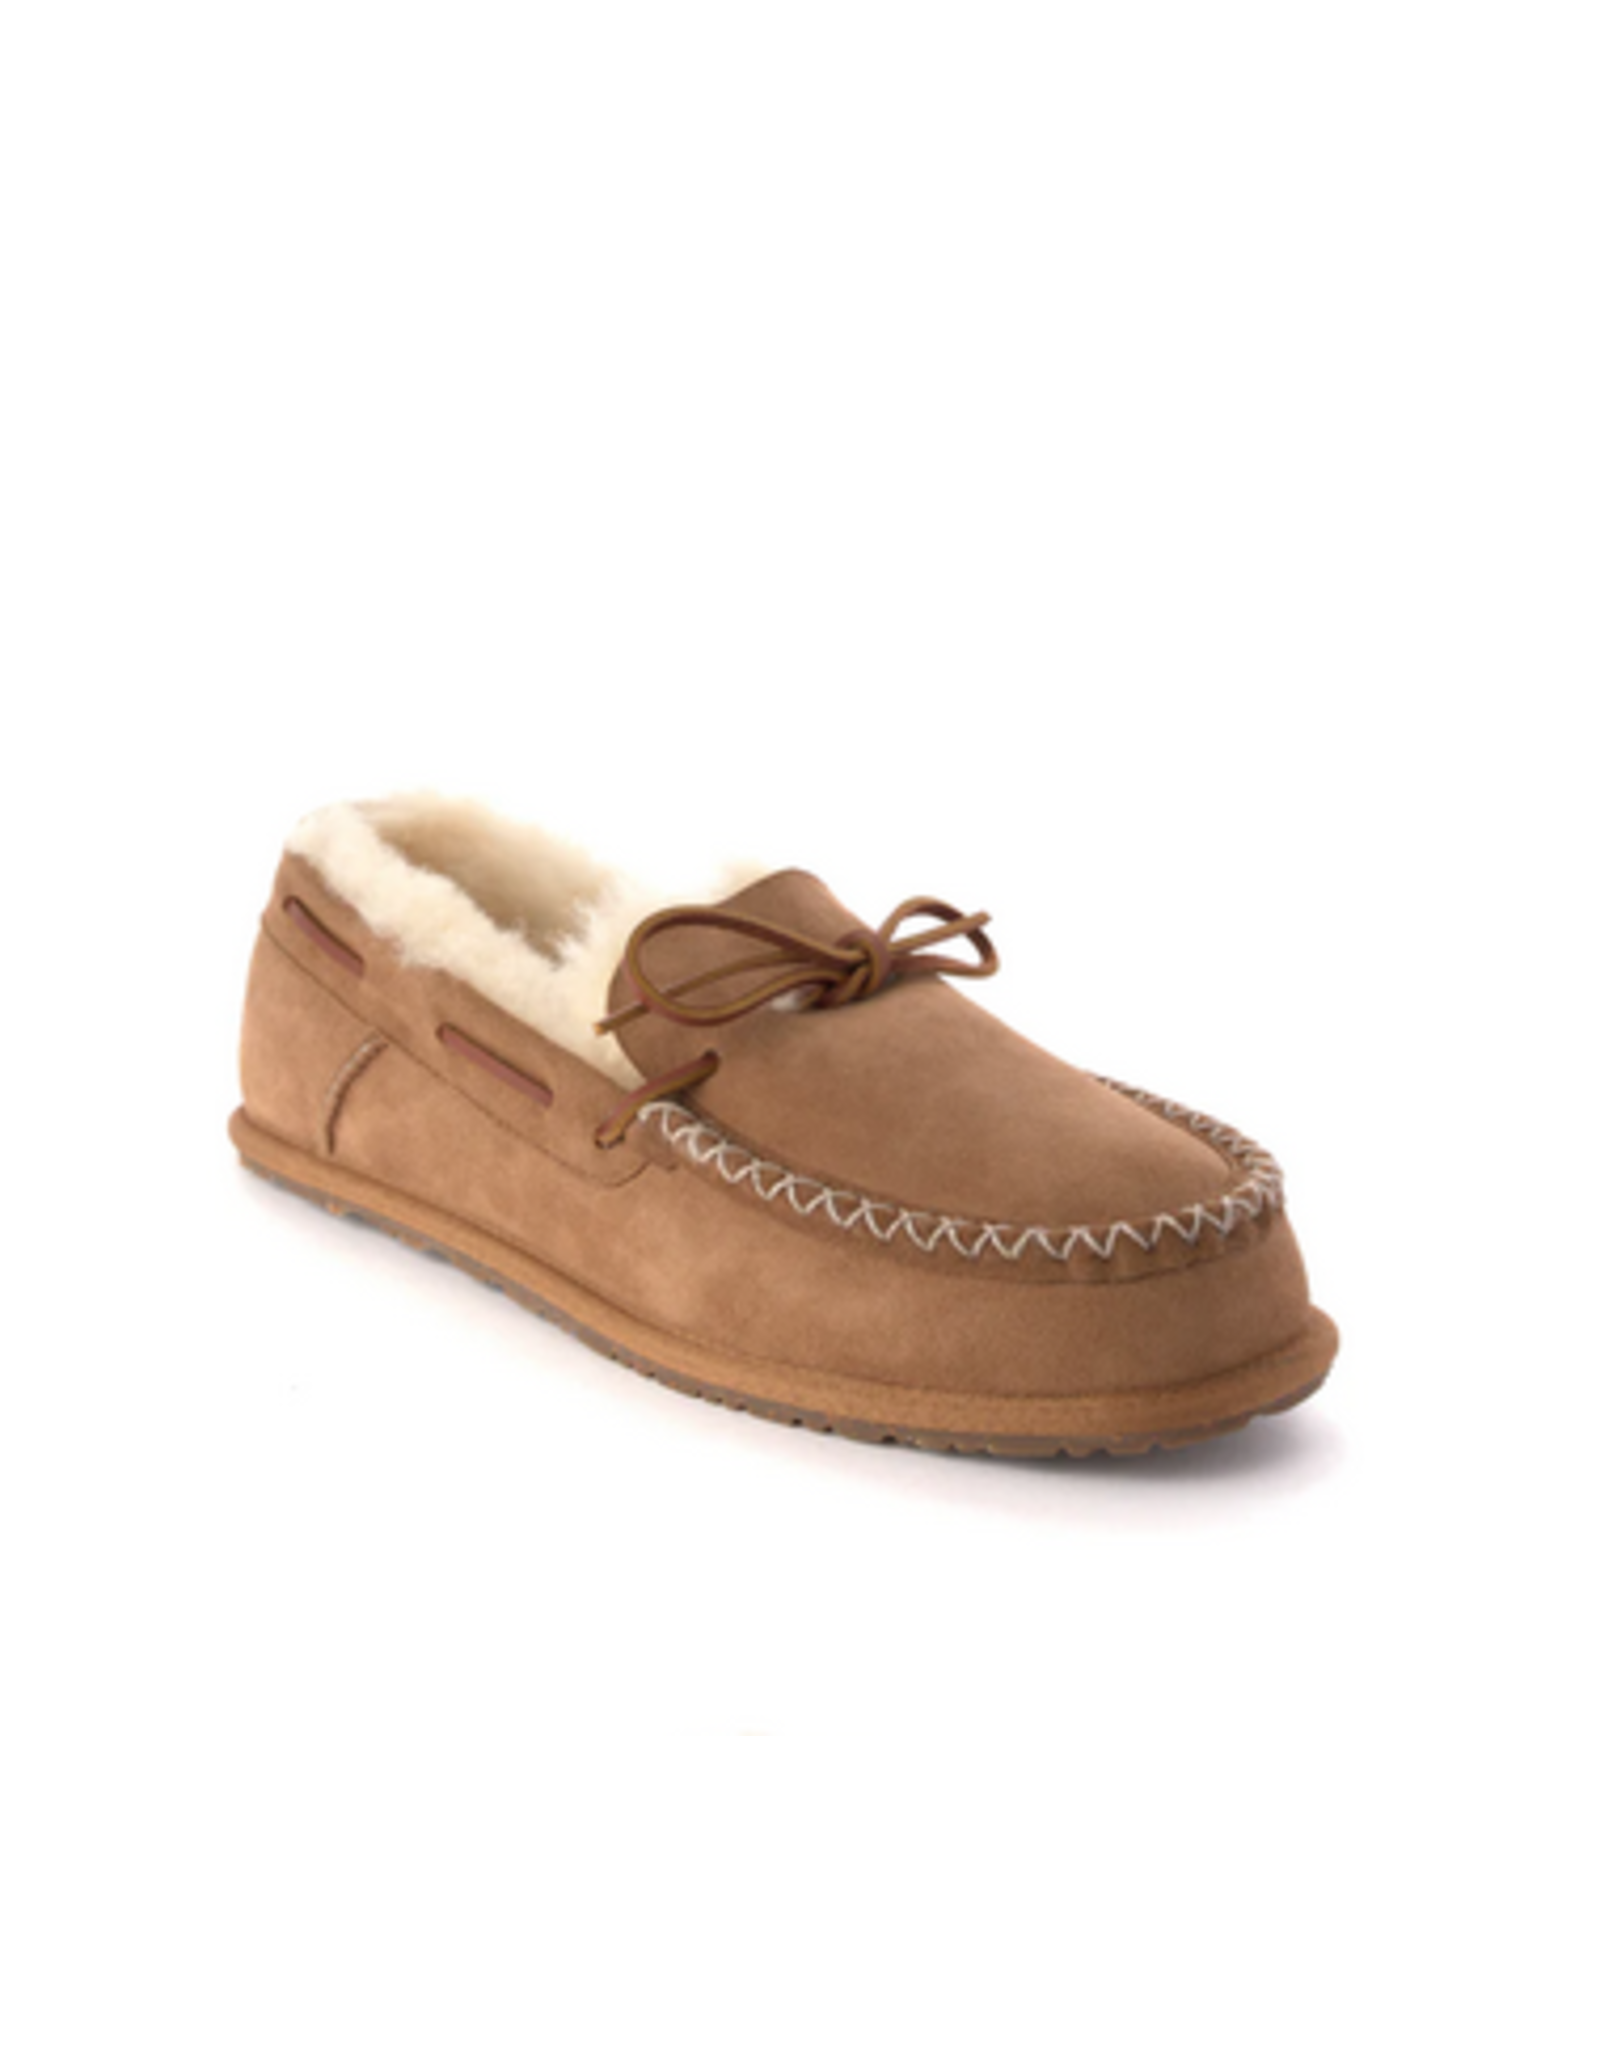 Lined Cabin Loafer with Sole Oak - 861M